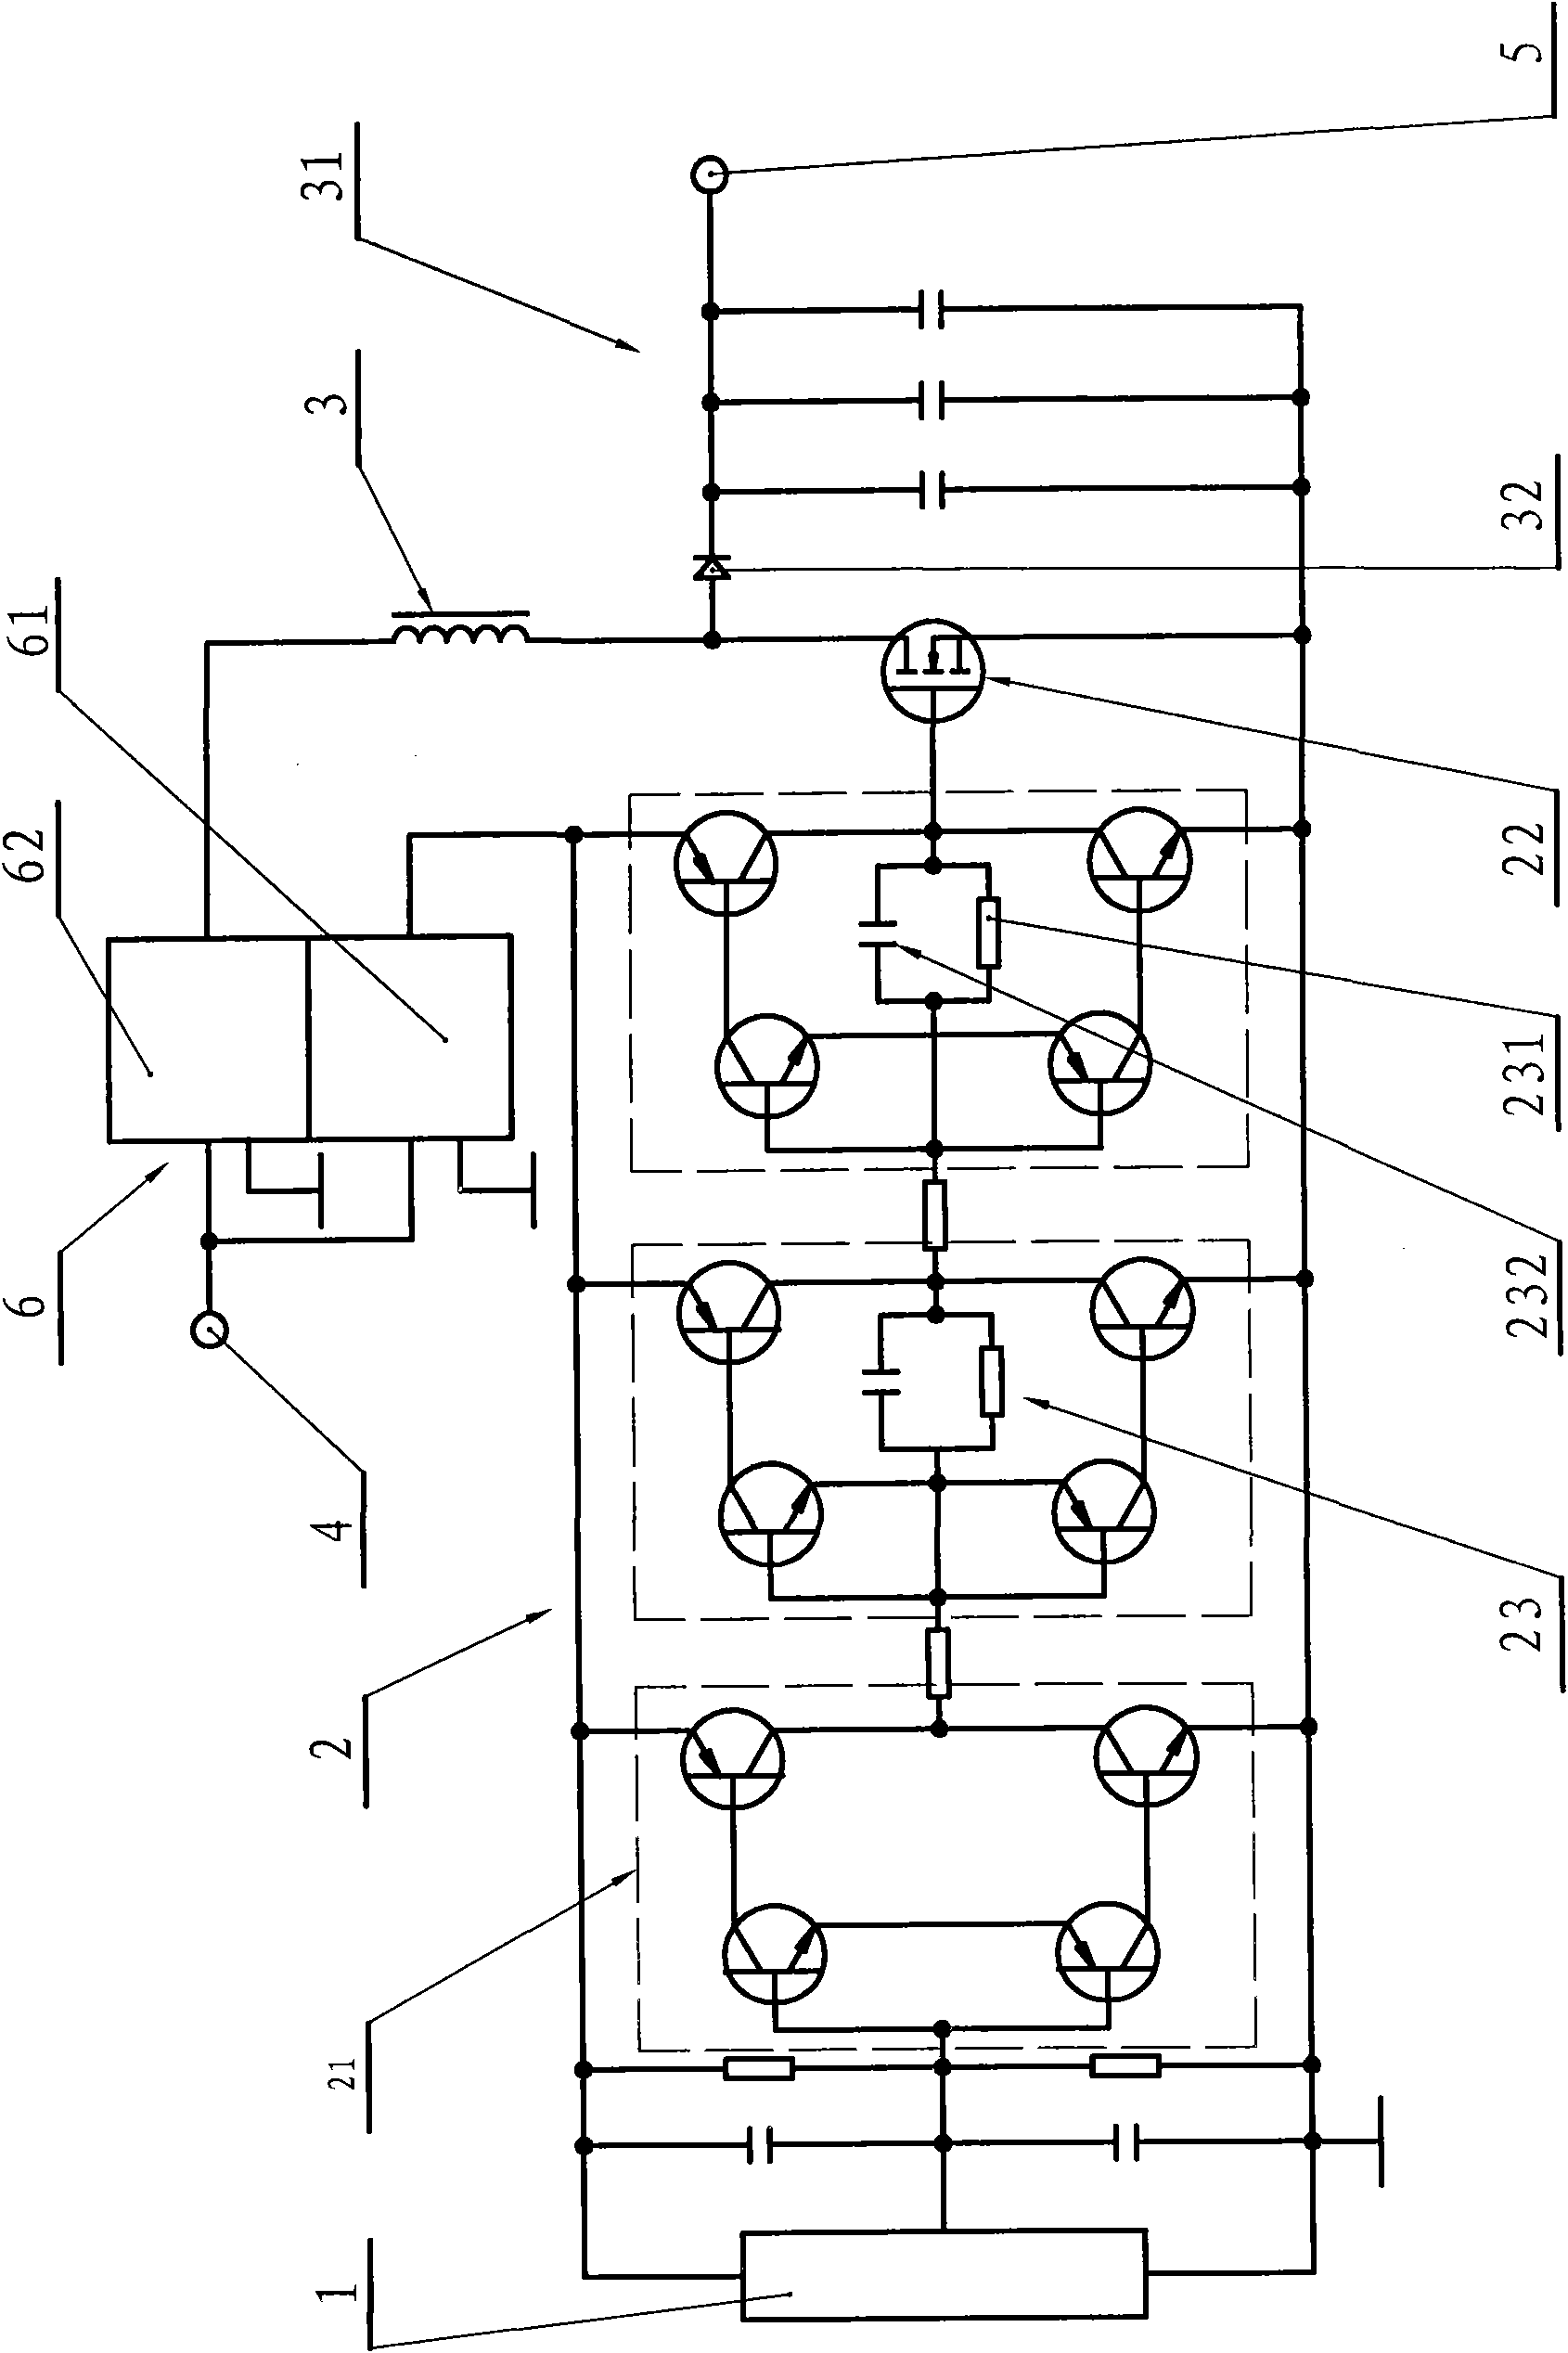 Direct current power circuit based on inductive storage and having no electrolytic capacitor